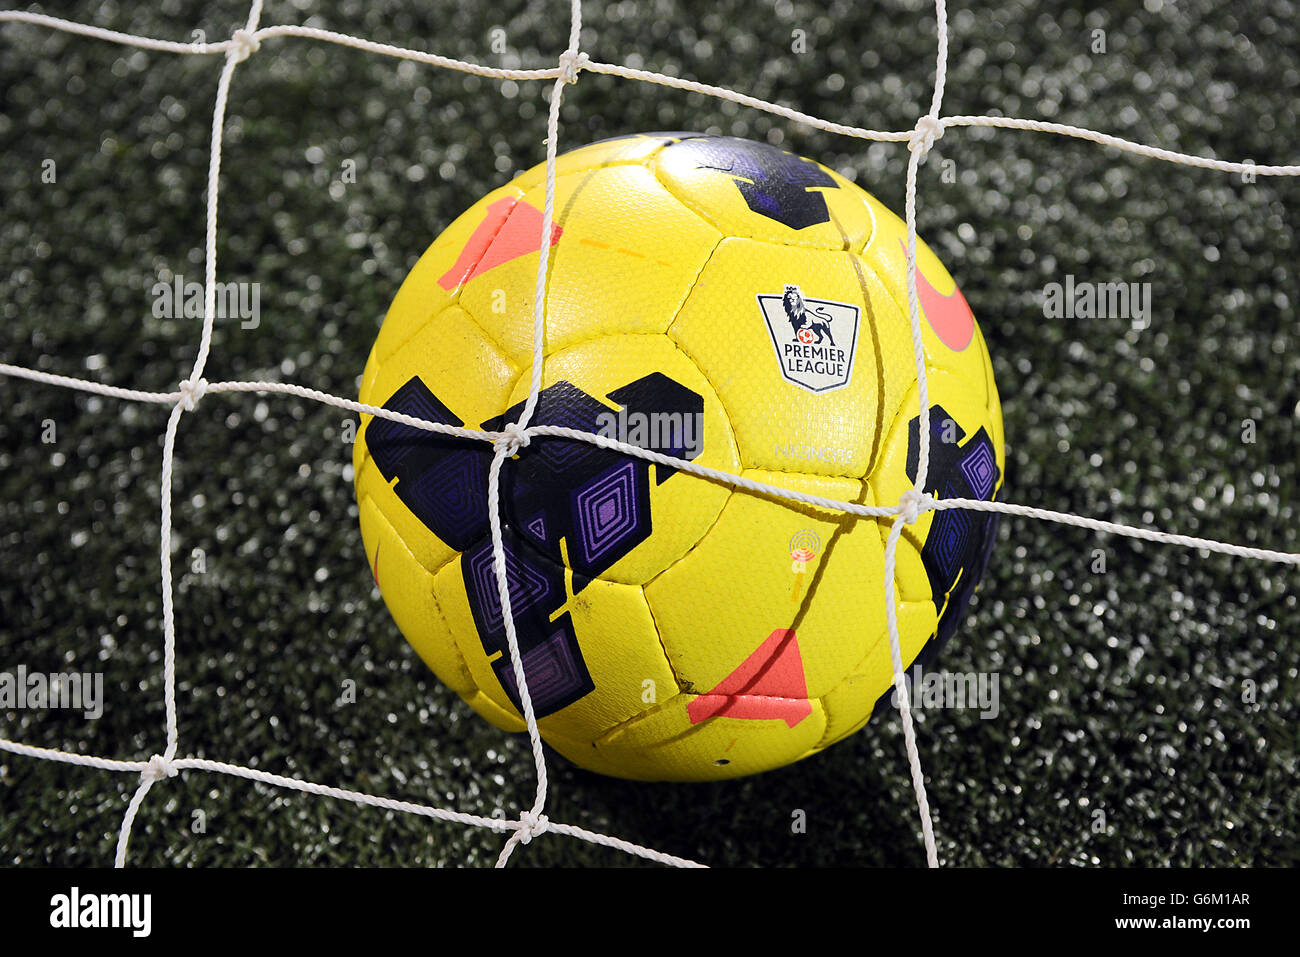 Soccer - Barclays Premier League - Fulham v Tottenham Hotspur - Craven Cottage. A yellow Mitre football behind netting. Stock Photo